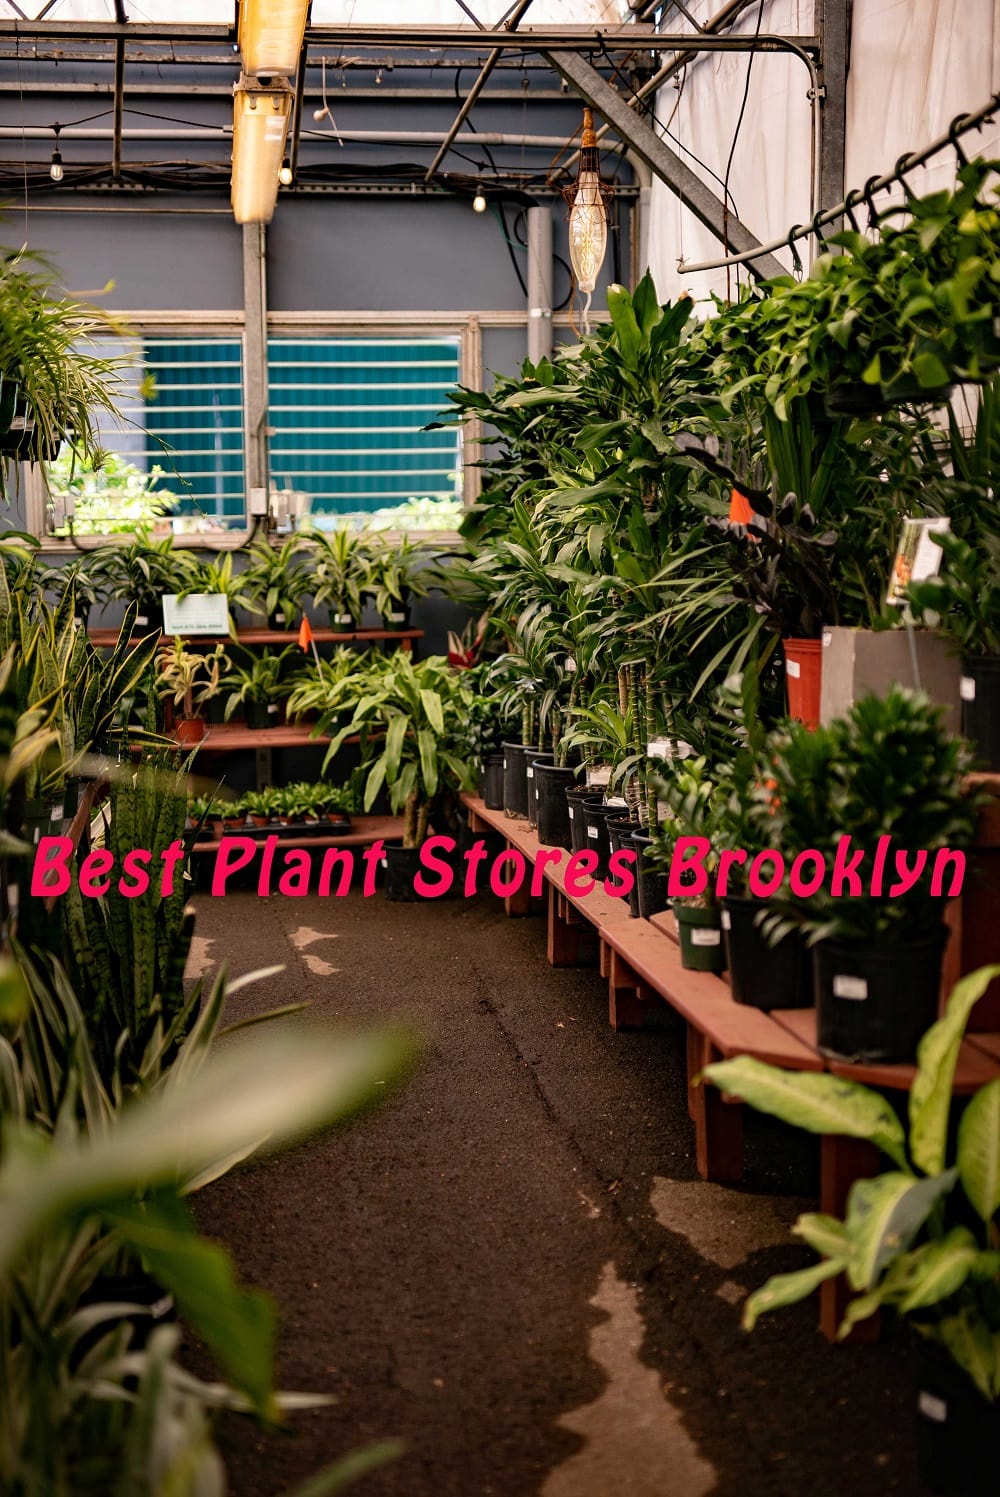 plants on shelves in a greenhouse plant shop